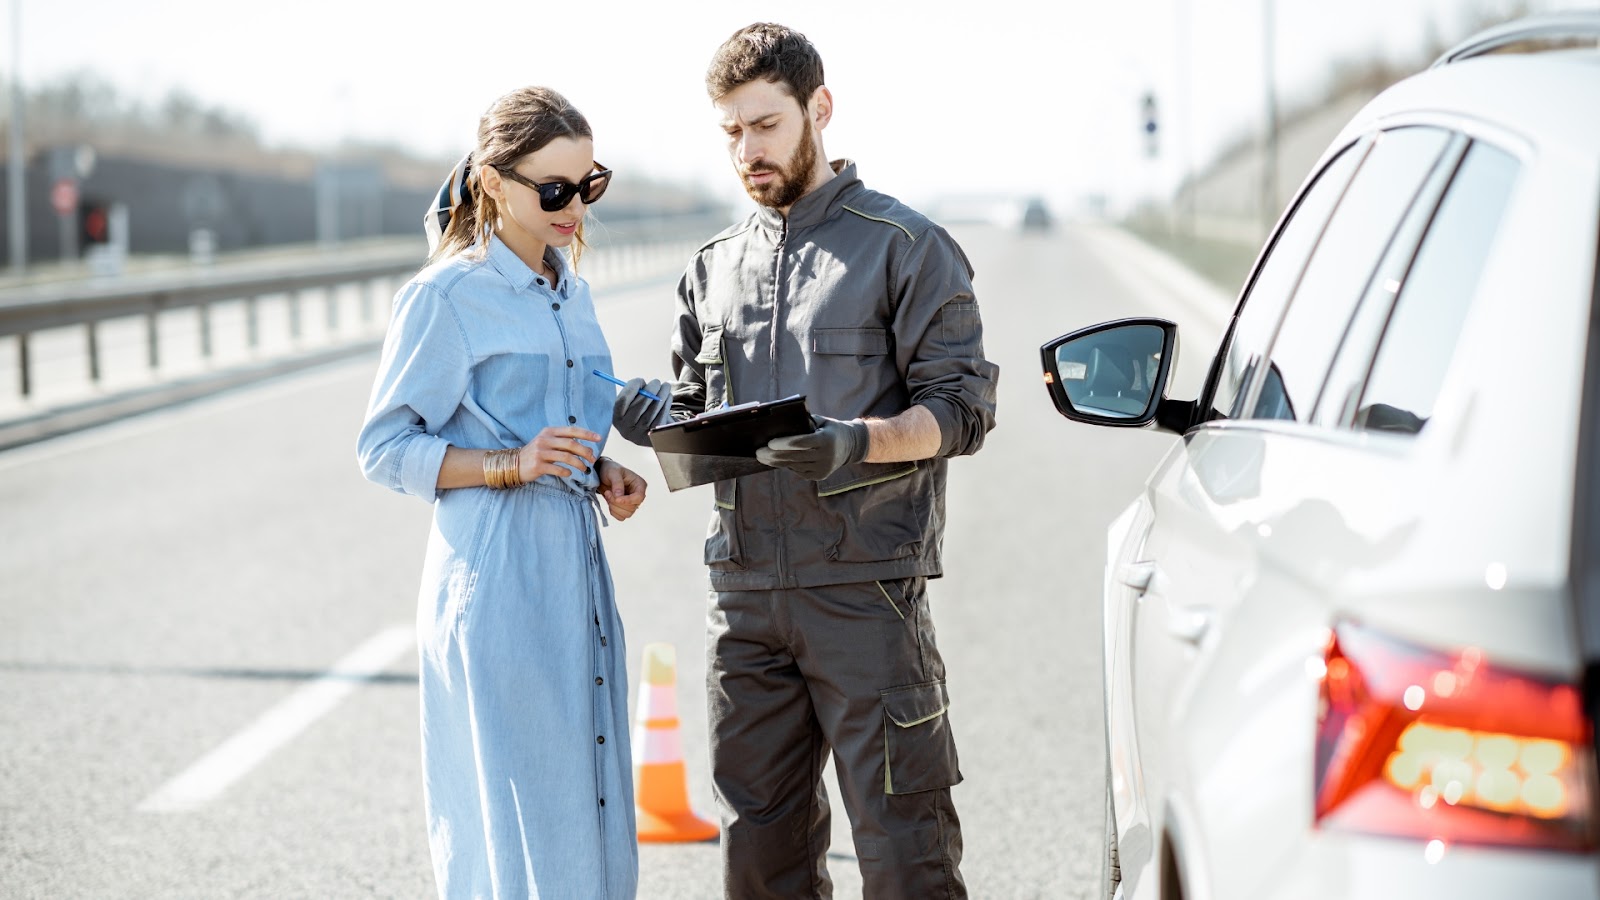 A roadside assistance professional provides car lockout service to a female motorist stranded on a highway.